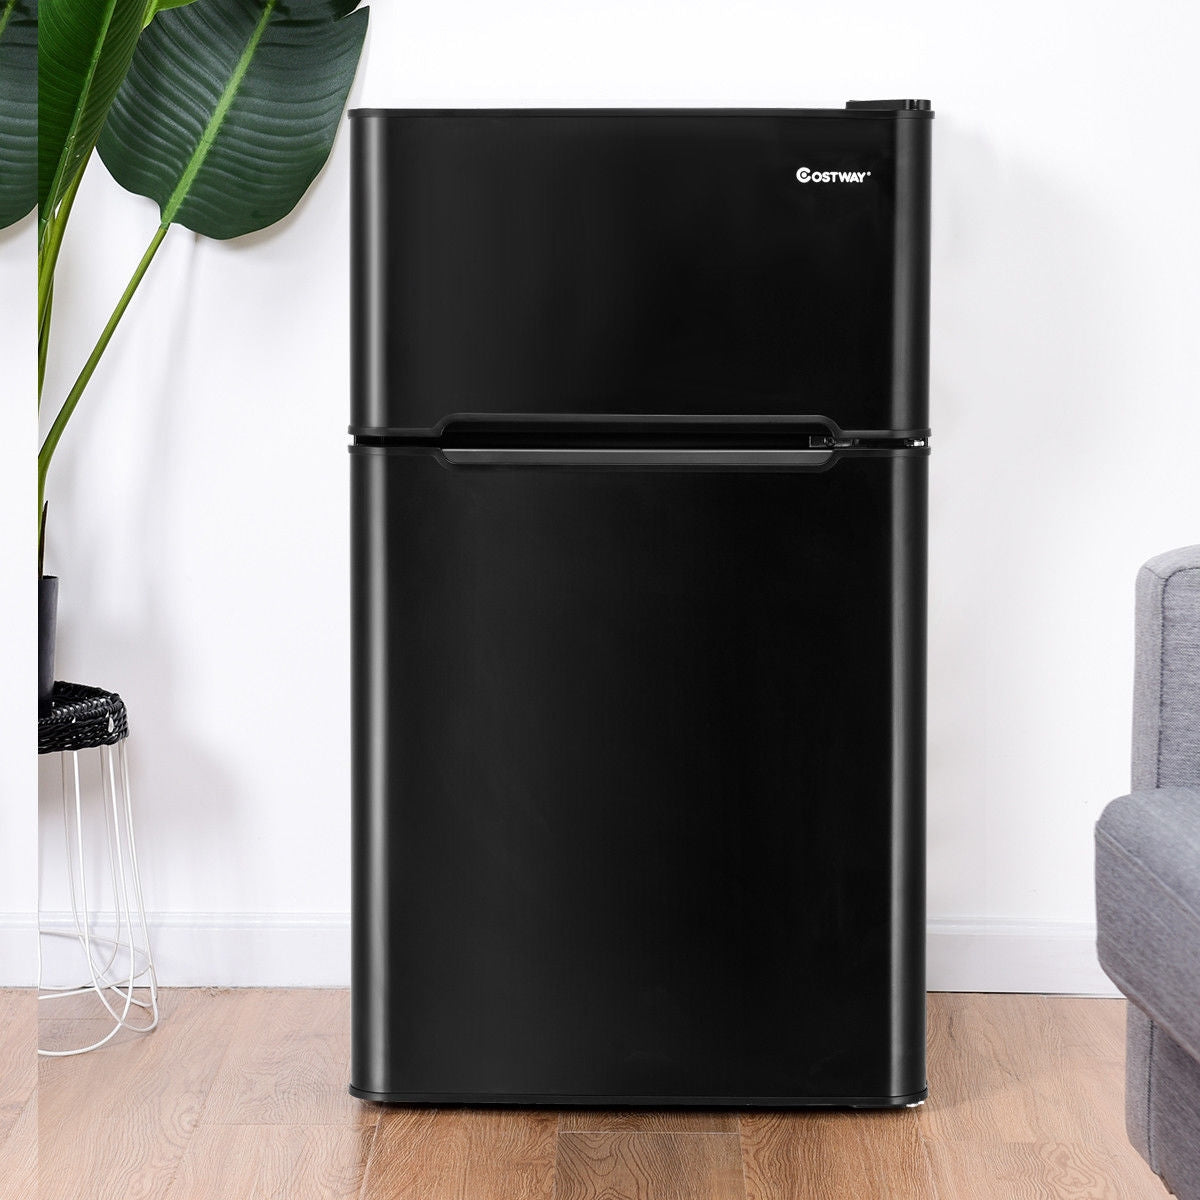 3.2 cu ft. Compact Stainless Steel Refrigerator-Black